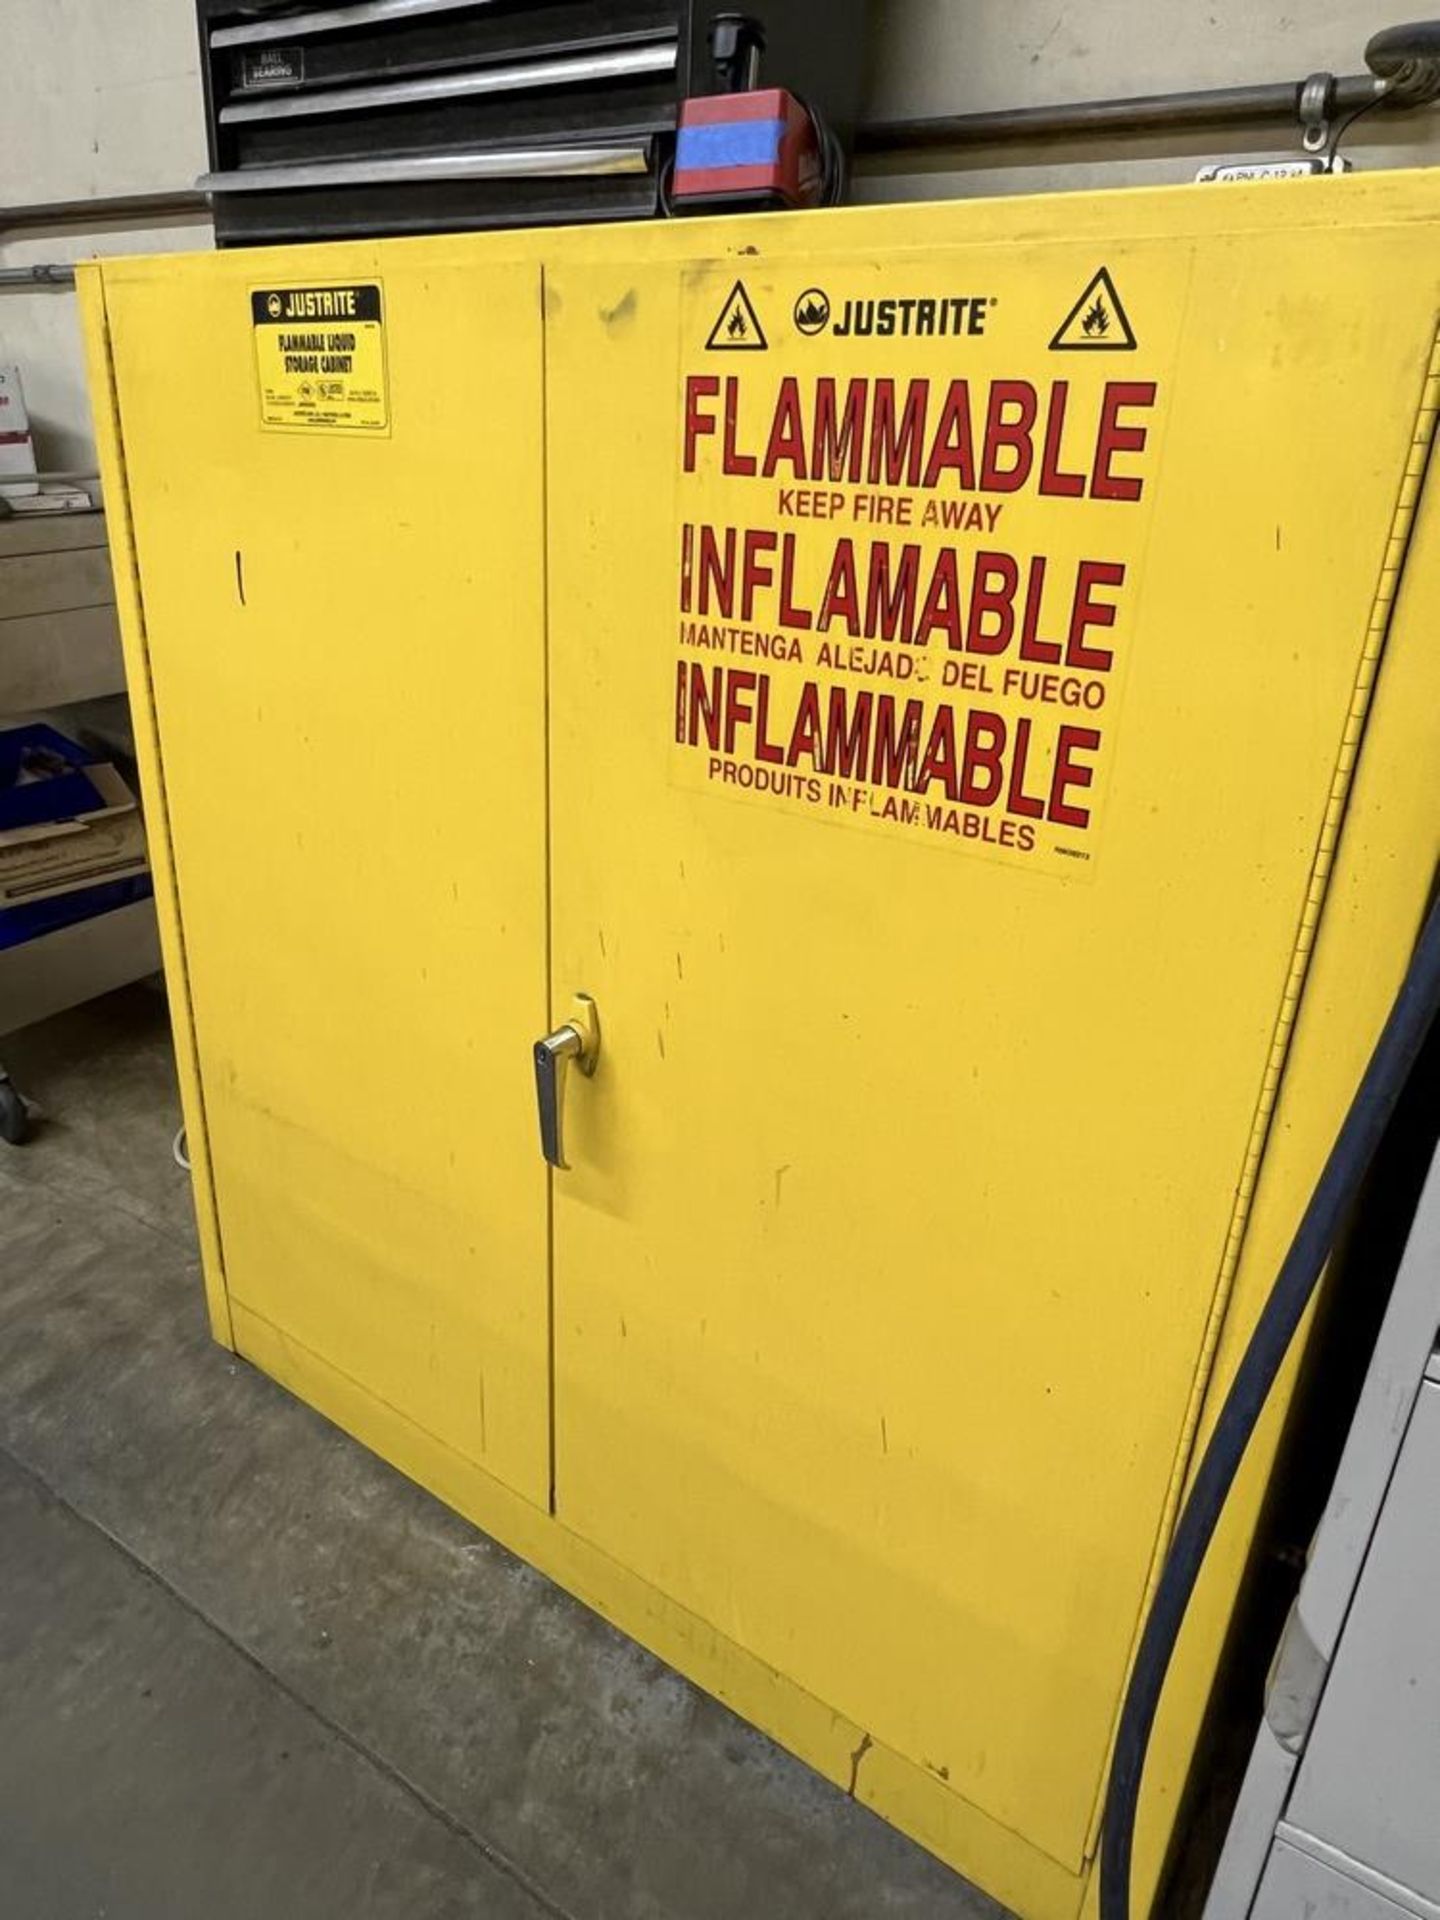 Just Rite 30 Gallon Capacity Flammable Liquid Storage Cabinet (No Contents) - Image 2 of 5